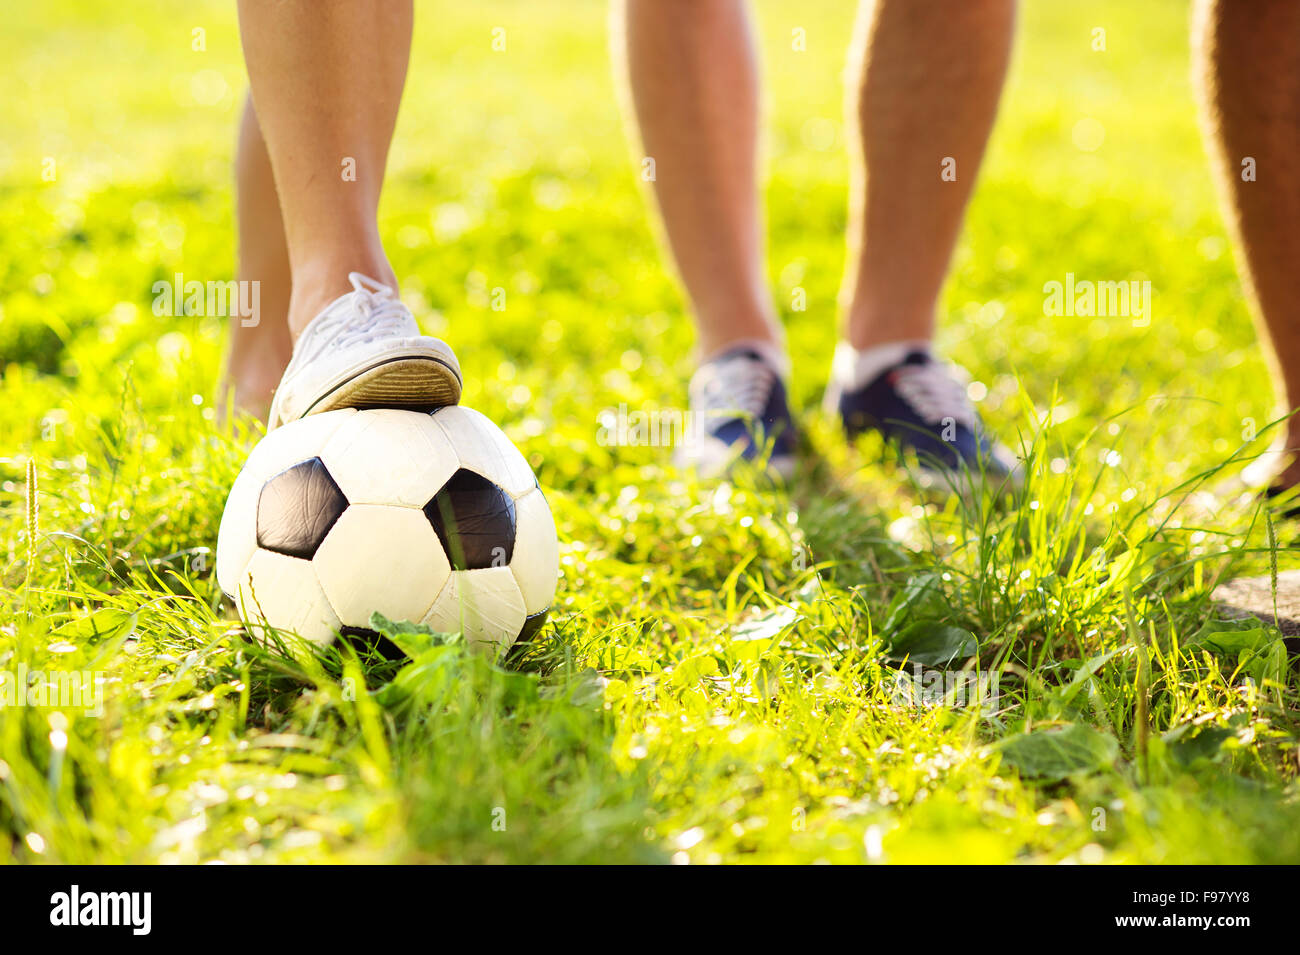 close up of feet and football ball on green grass lawn Stock Photo